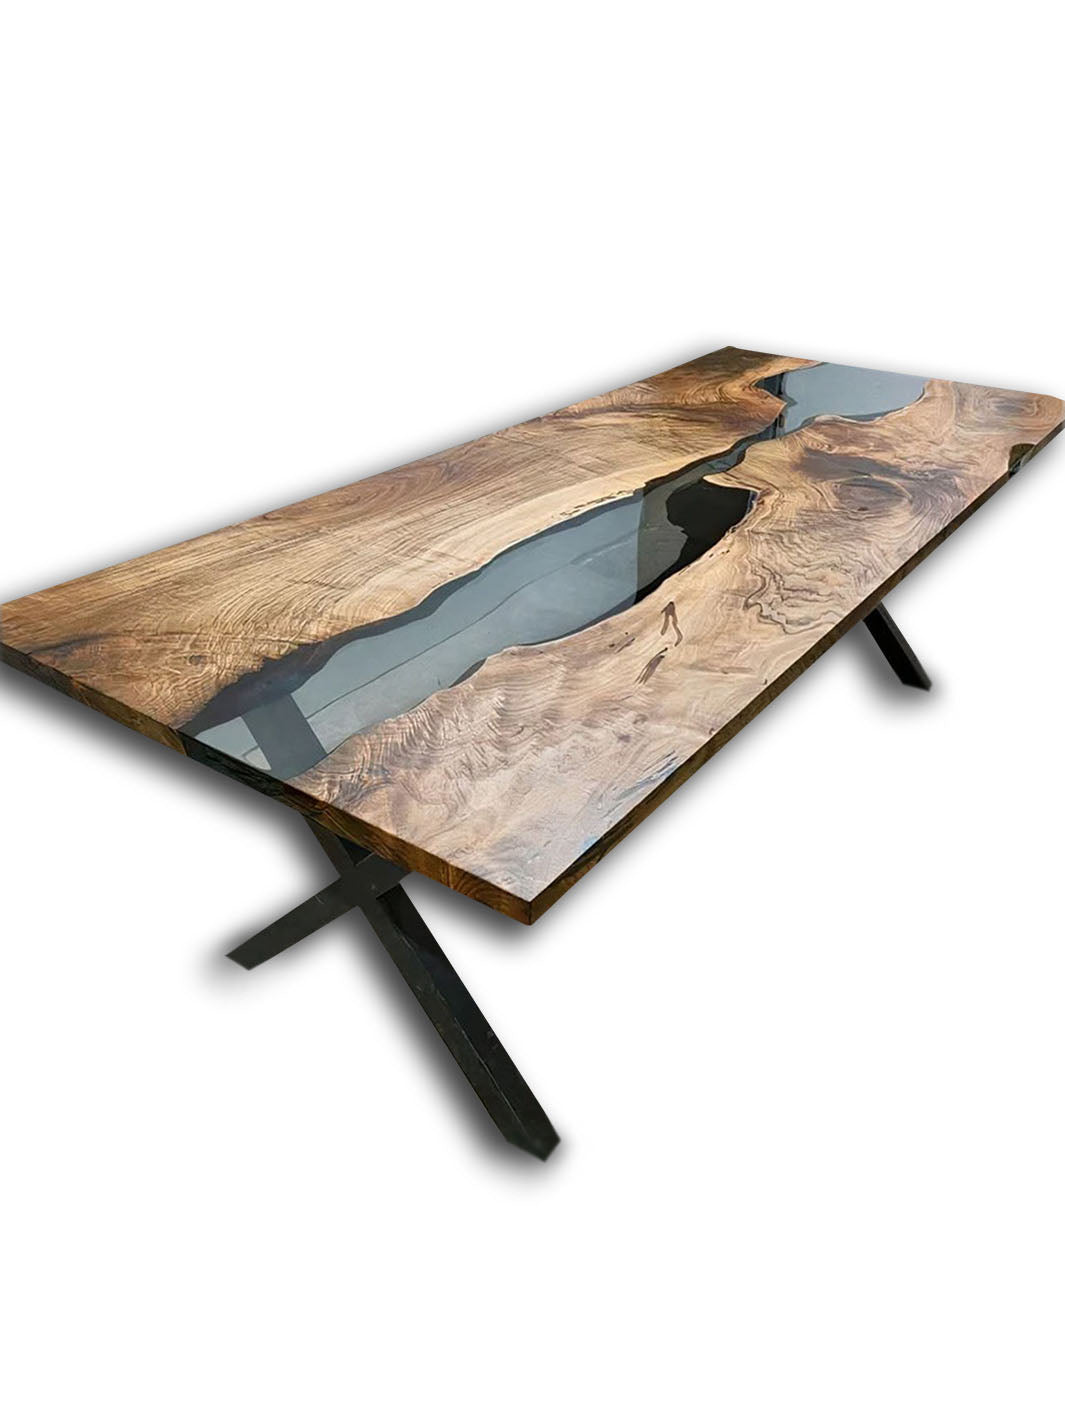 Custom Handcrafted Walnut Epoxy River Dining Room Wooden Countertop Table Harden Tables HWC-0087